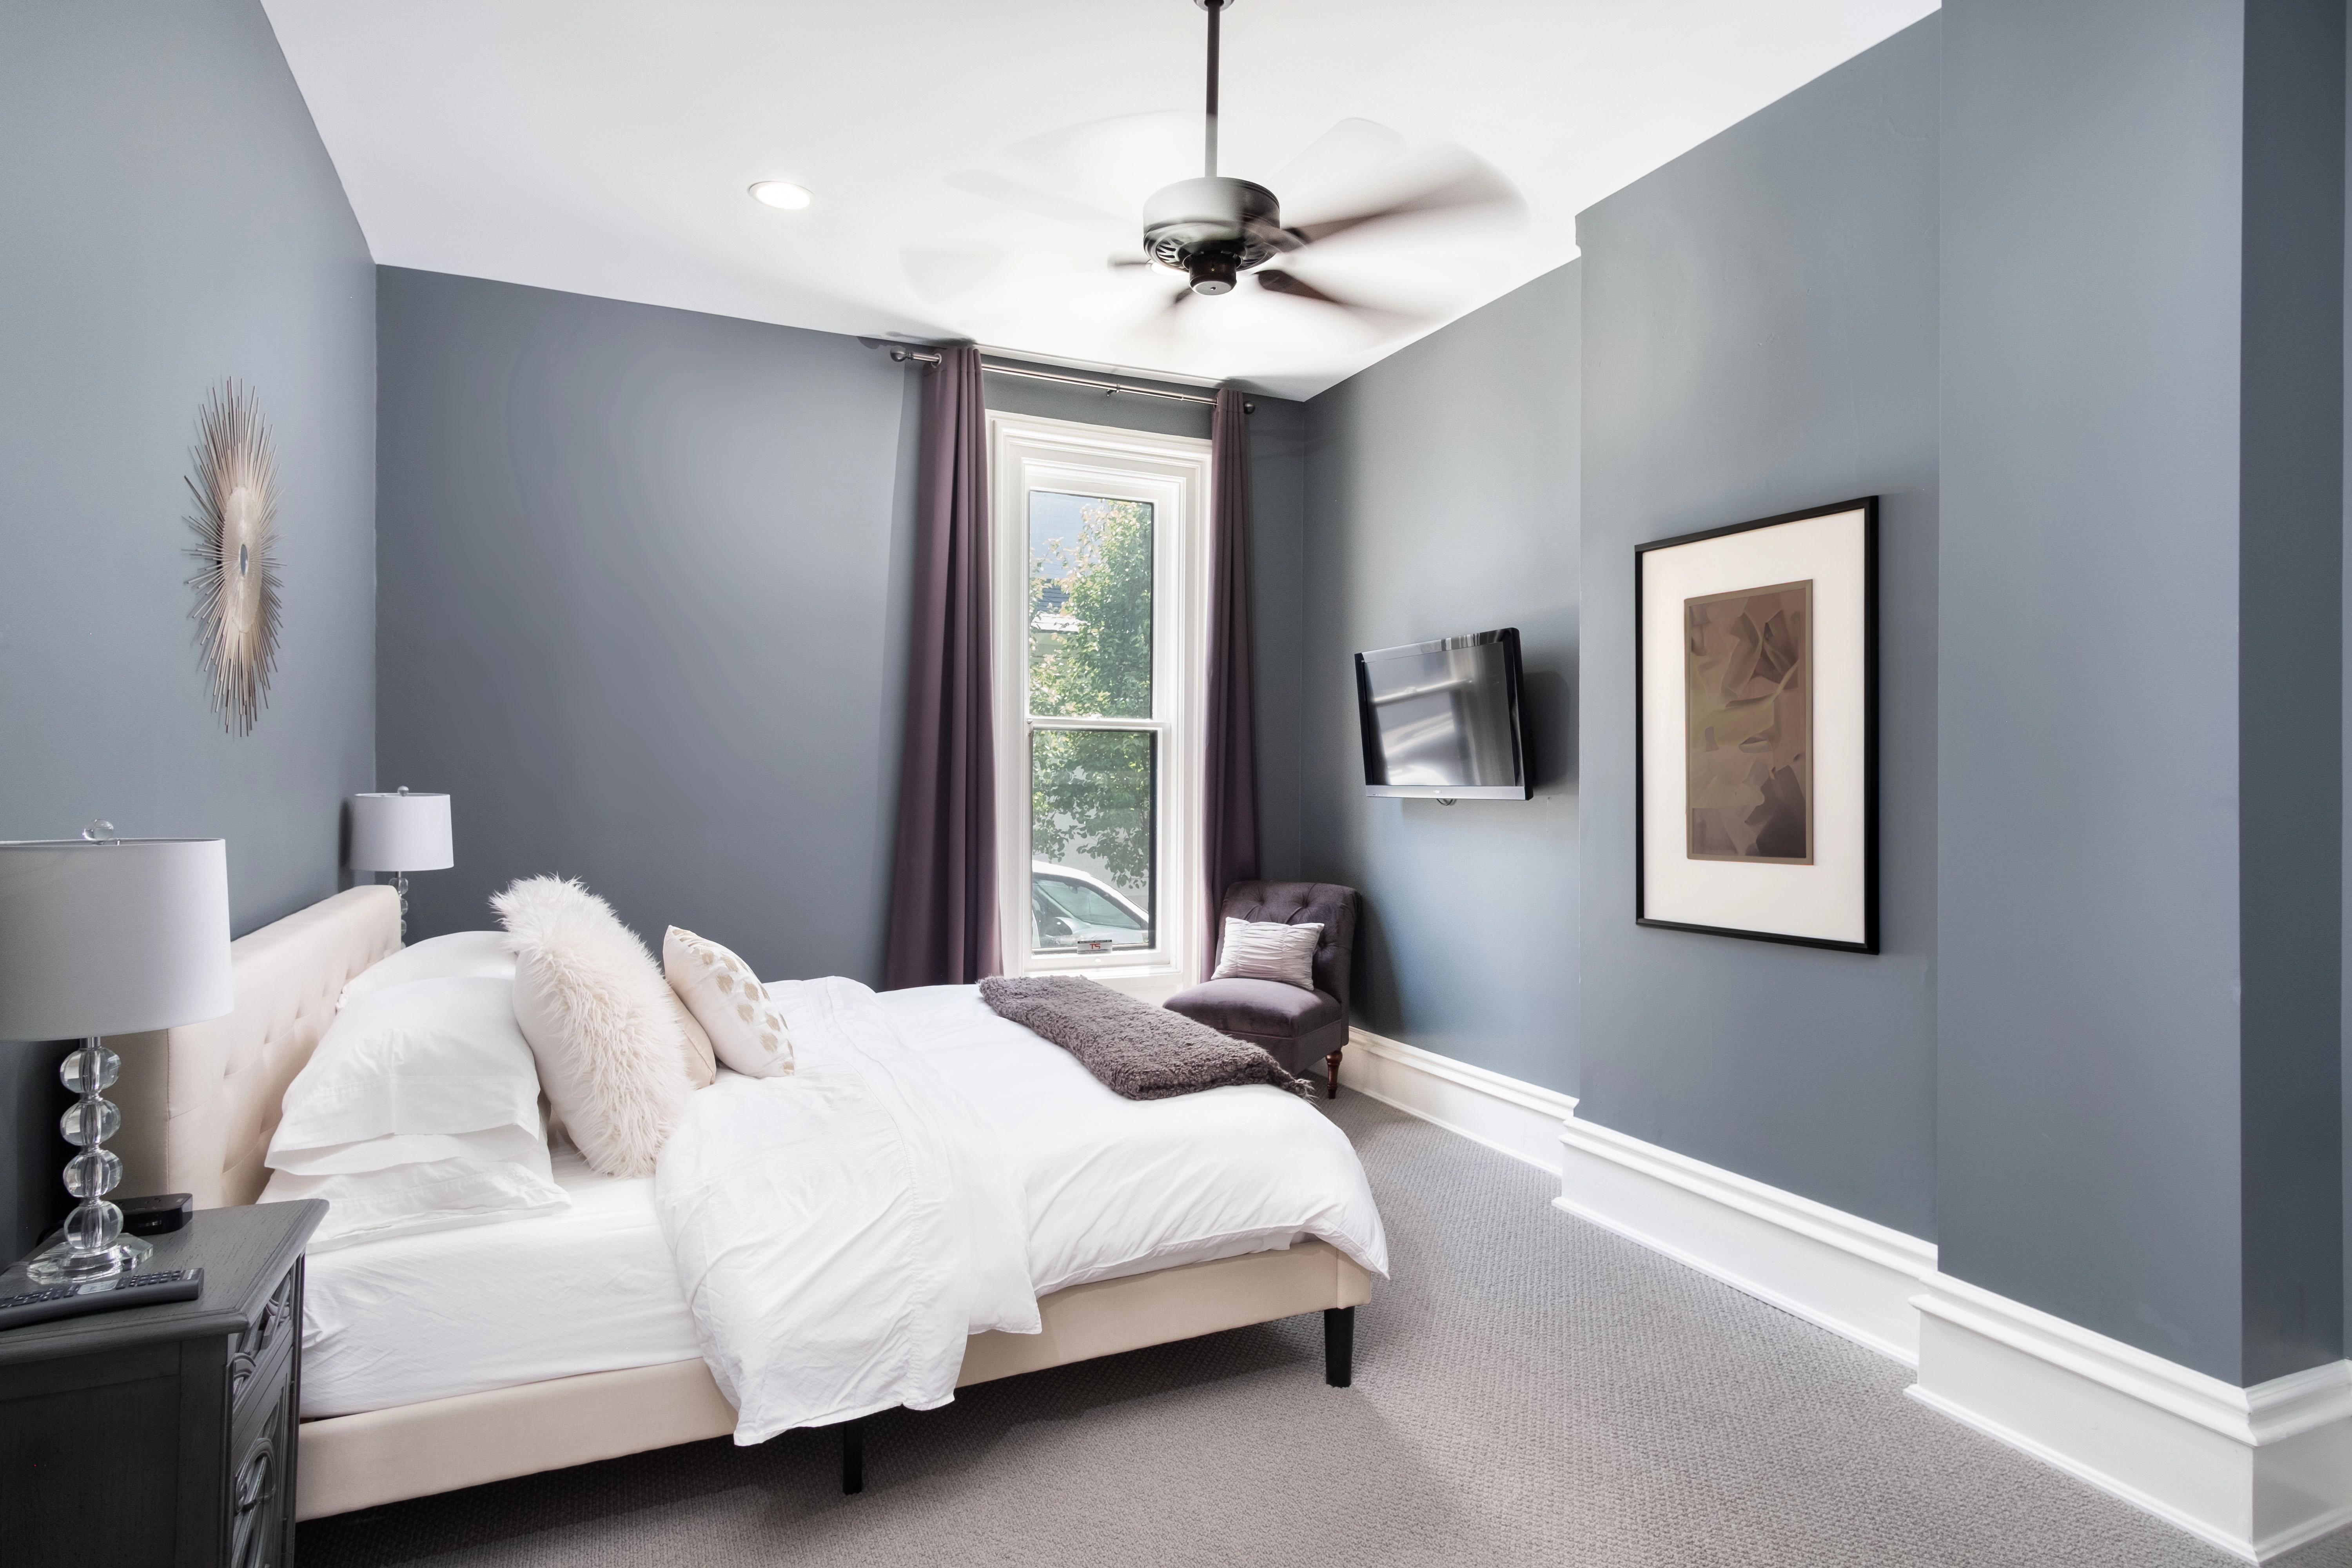 Modern chic style bedroom with steel blue walls, white trim and baseboards, and chic decor.